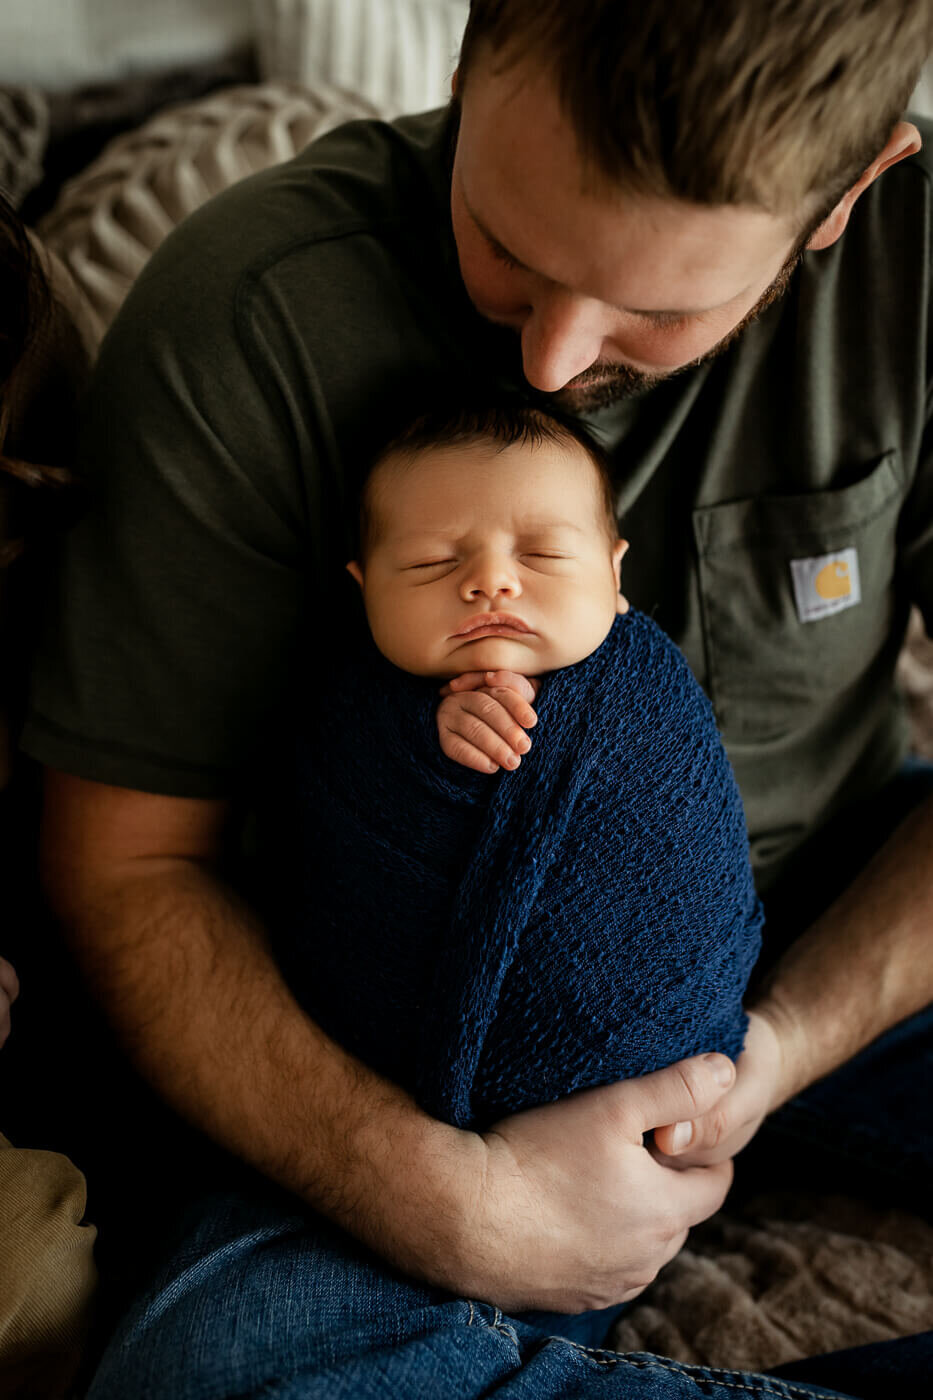 Dad snuggling newborn baby wrapped in blue